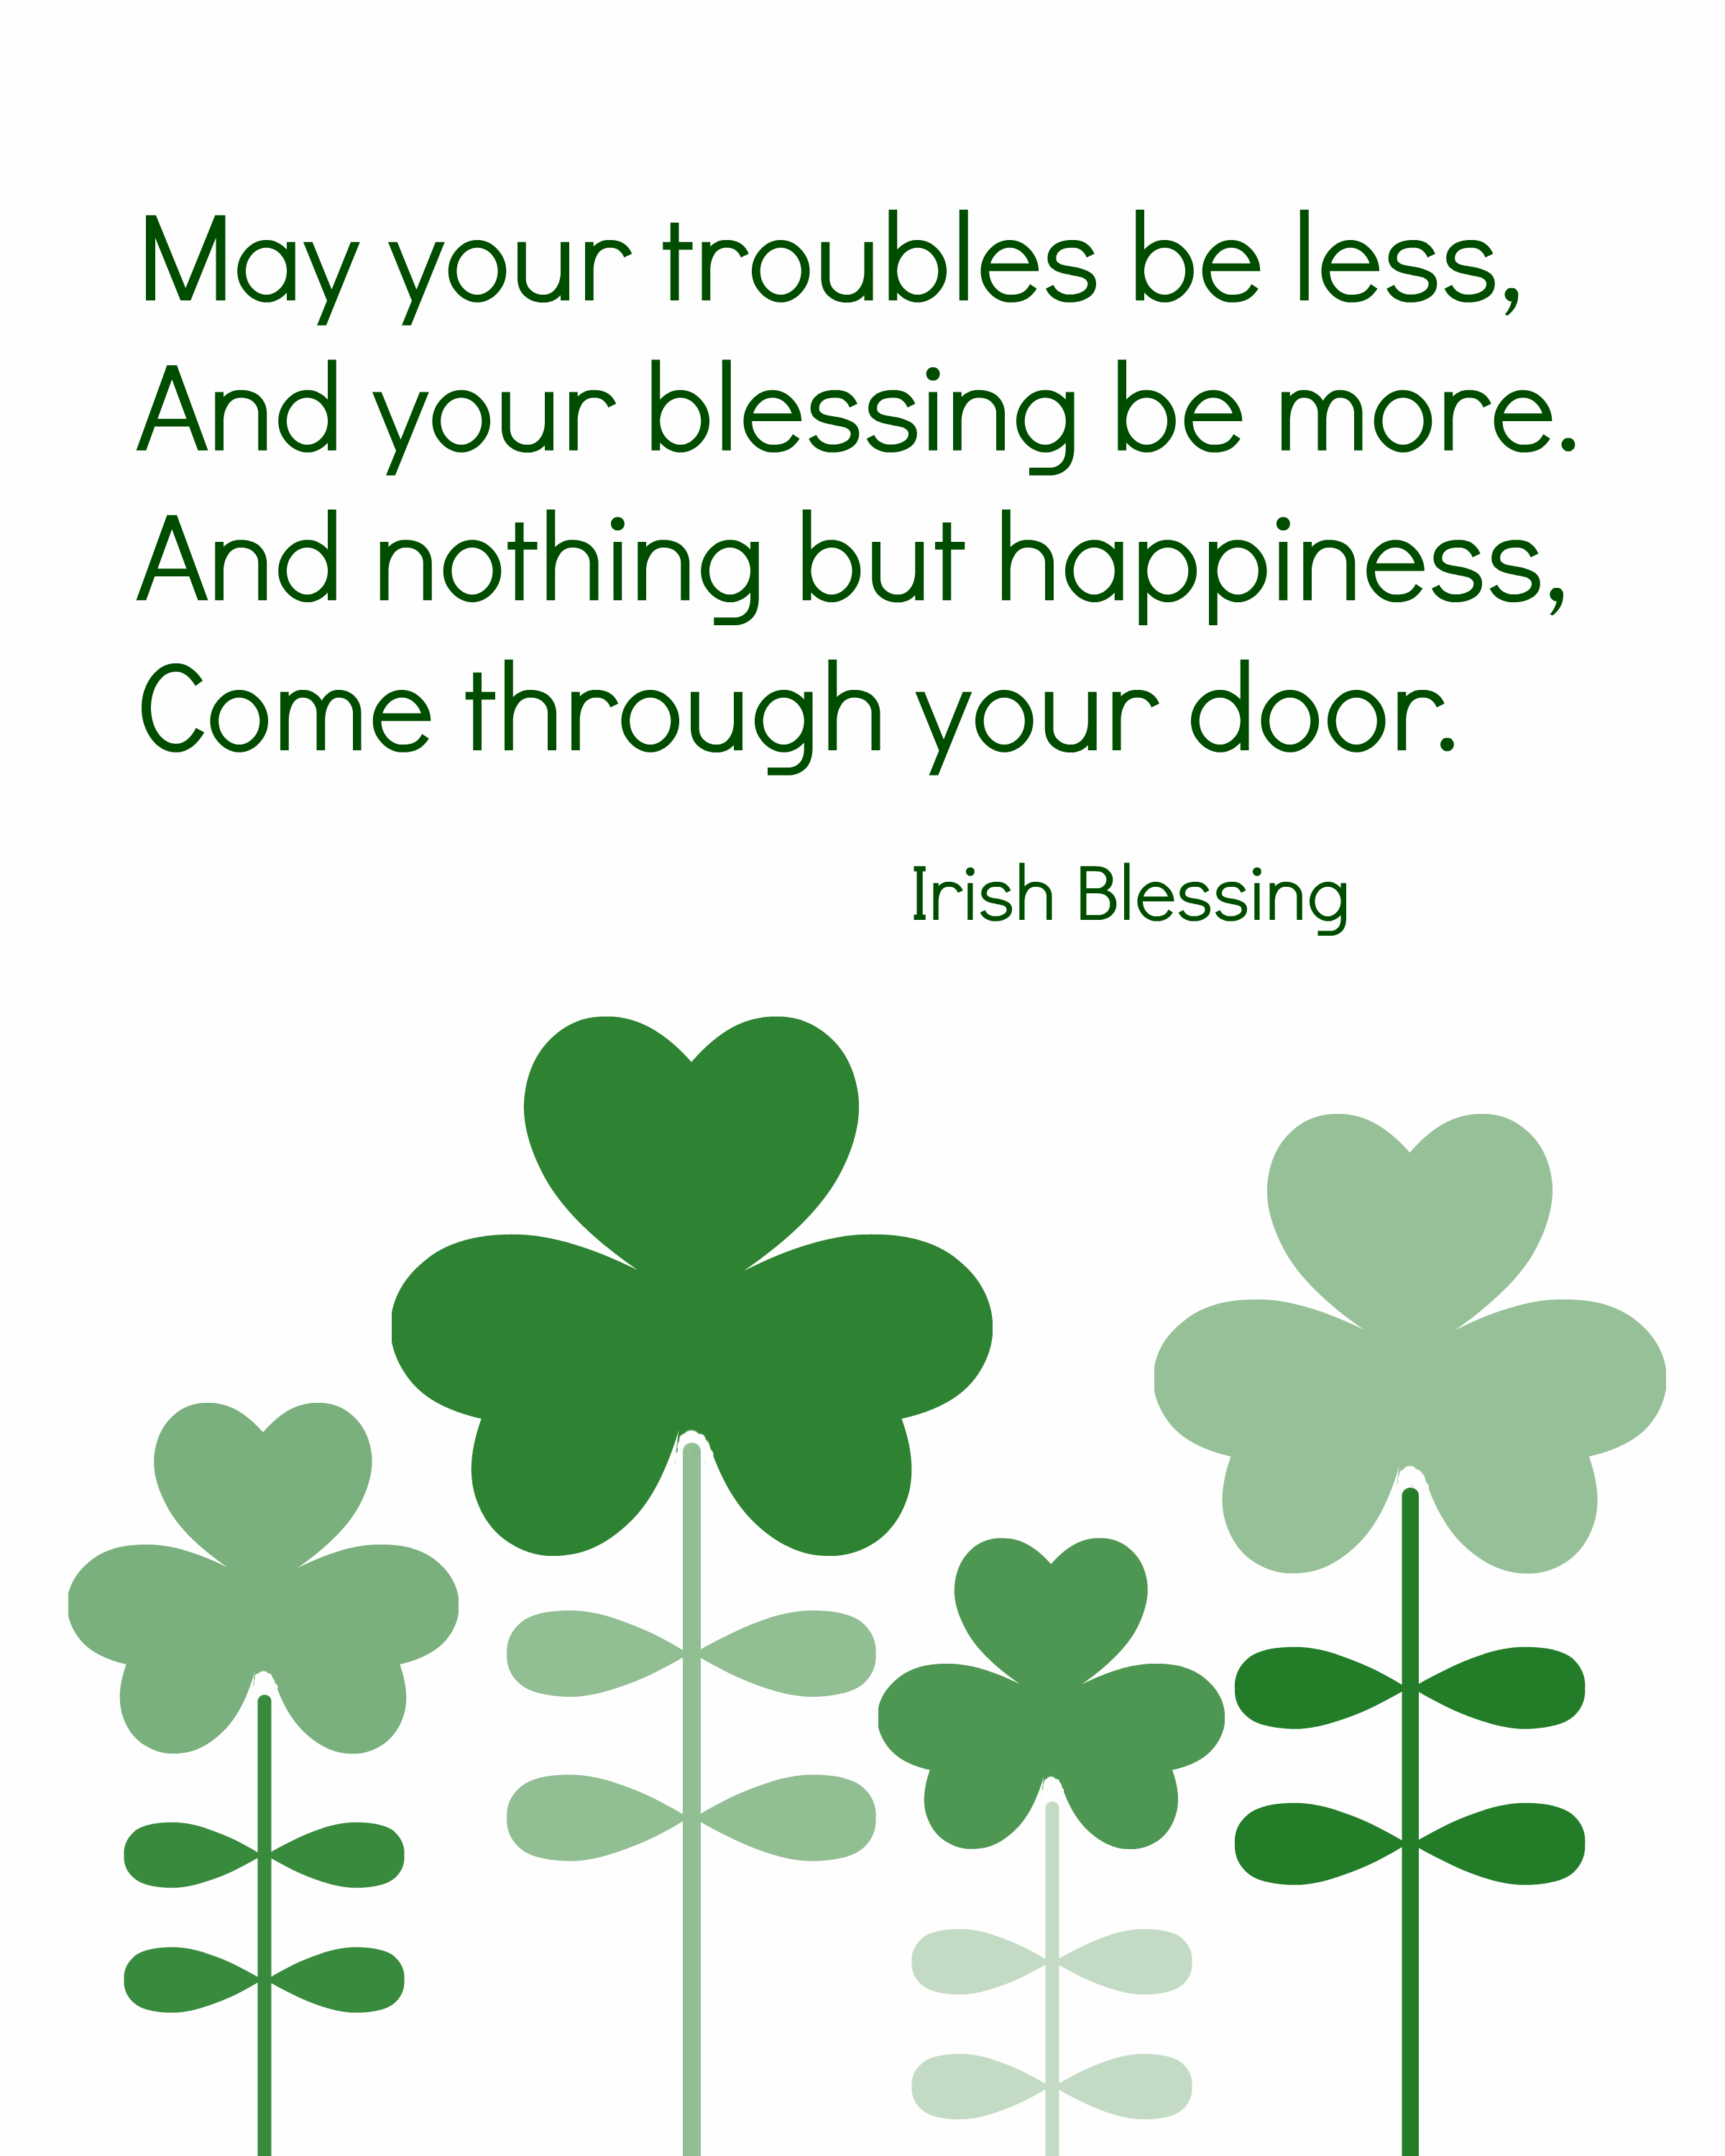 St. Patrick's Day Quote - An Extraordinary Day